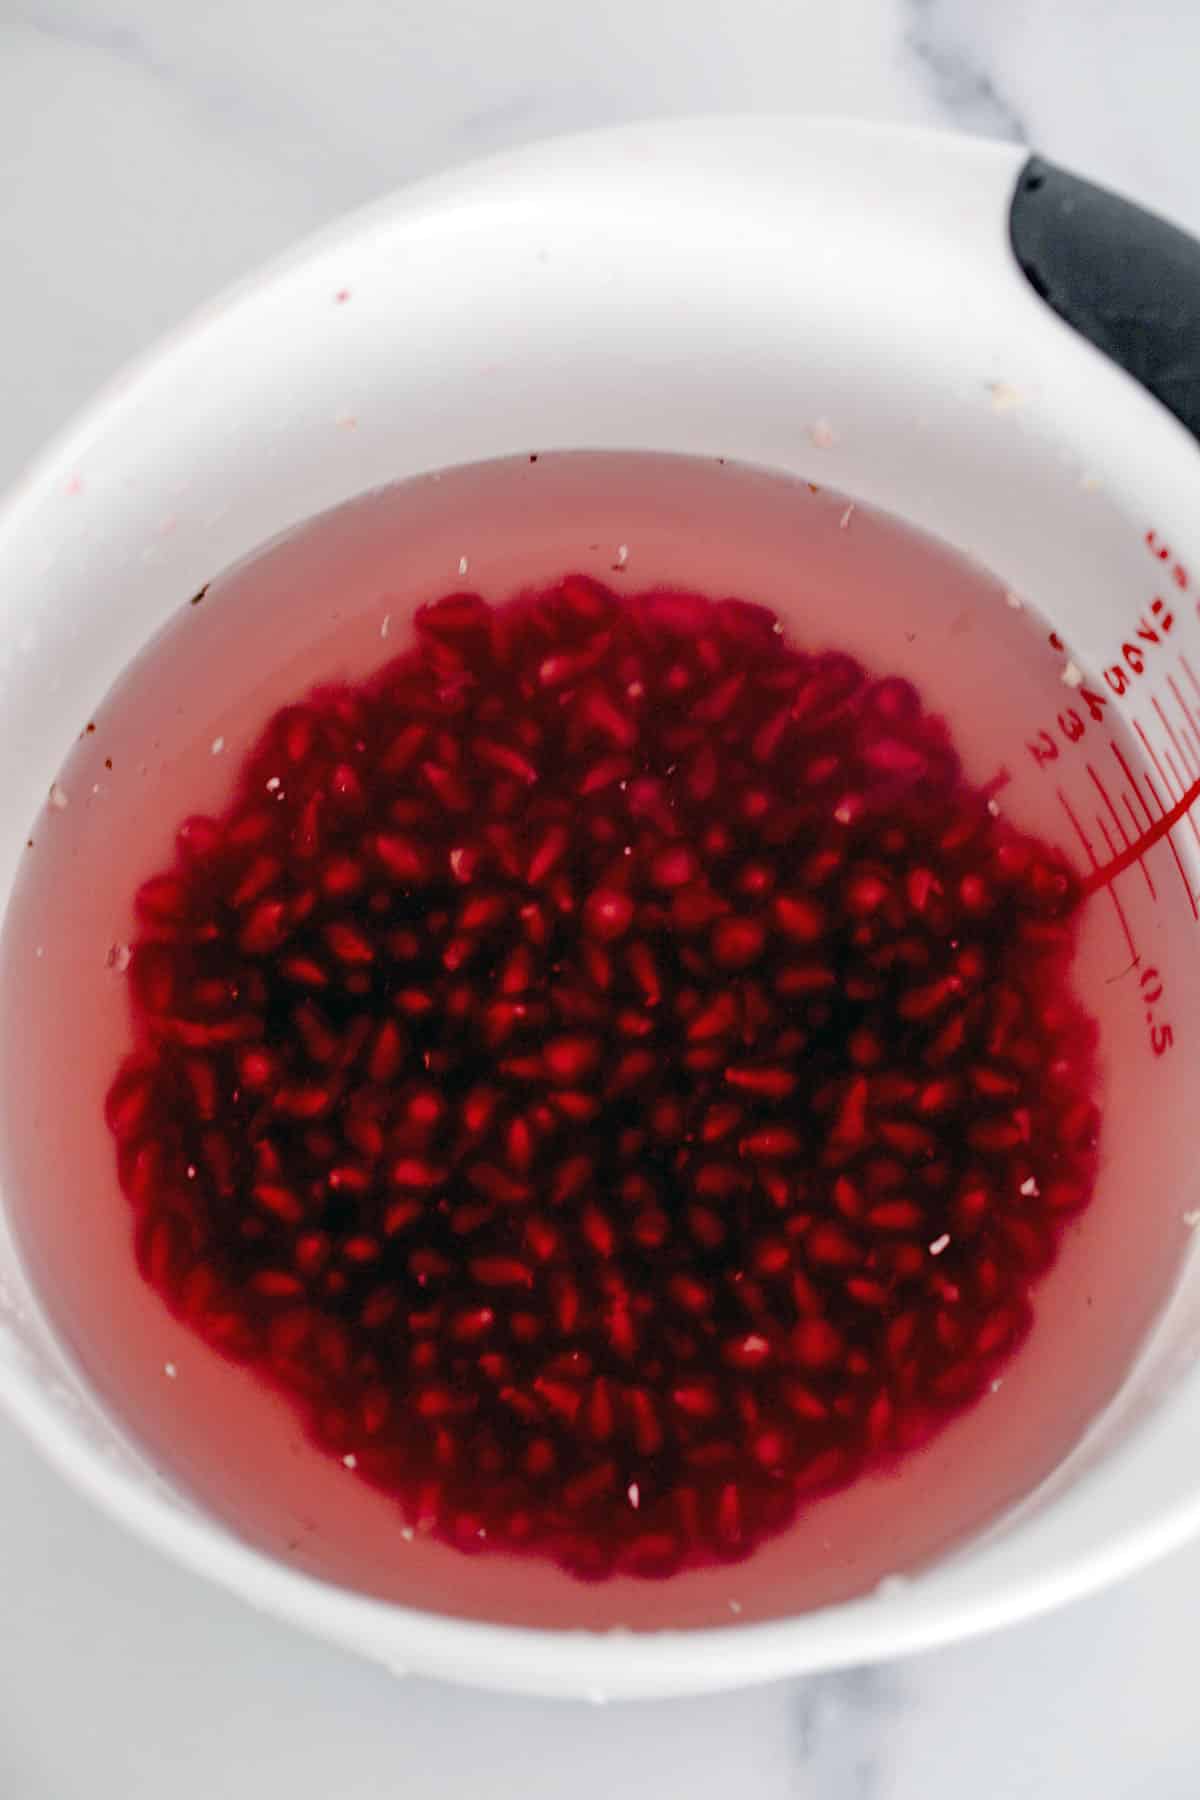 Pomegranate arils in bowl with water.